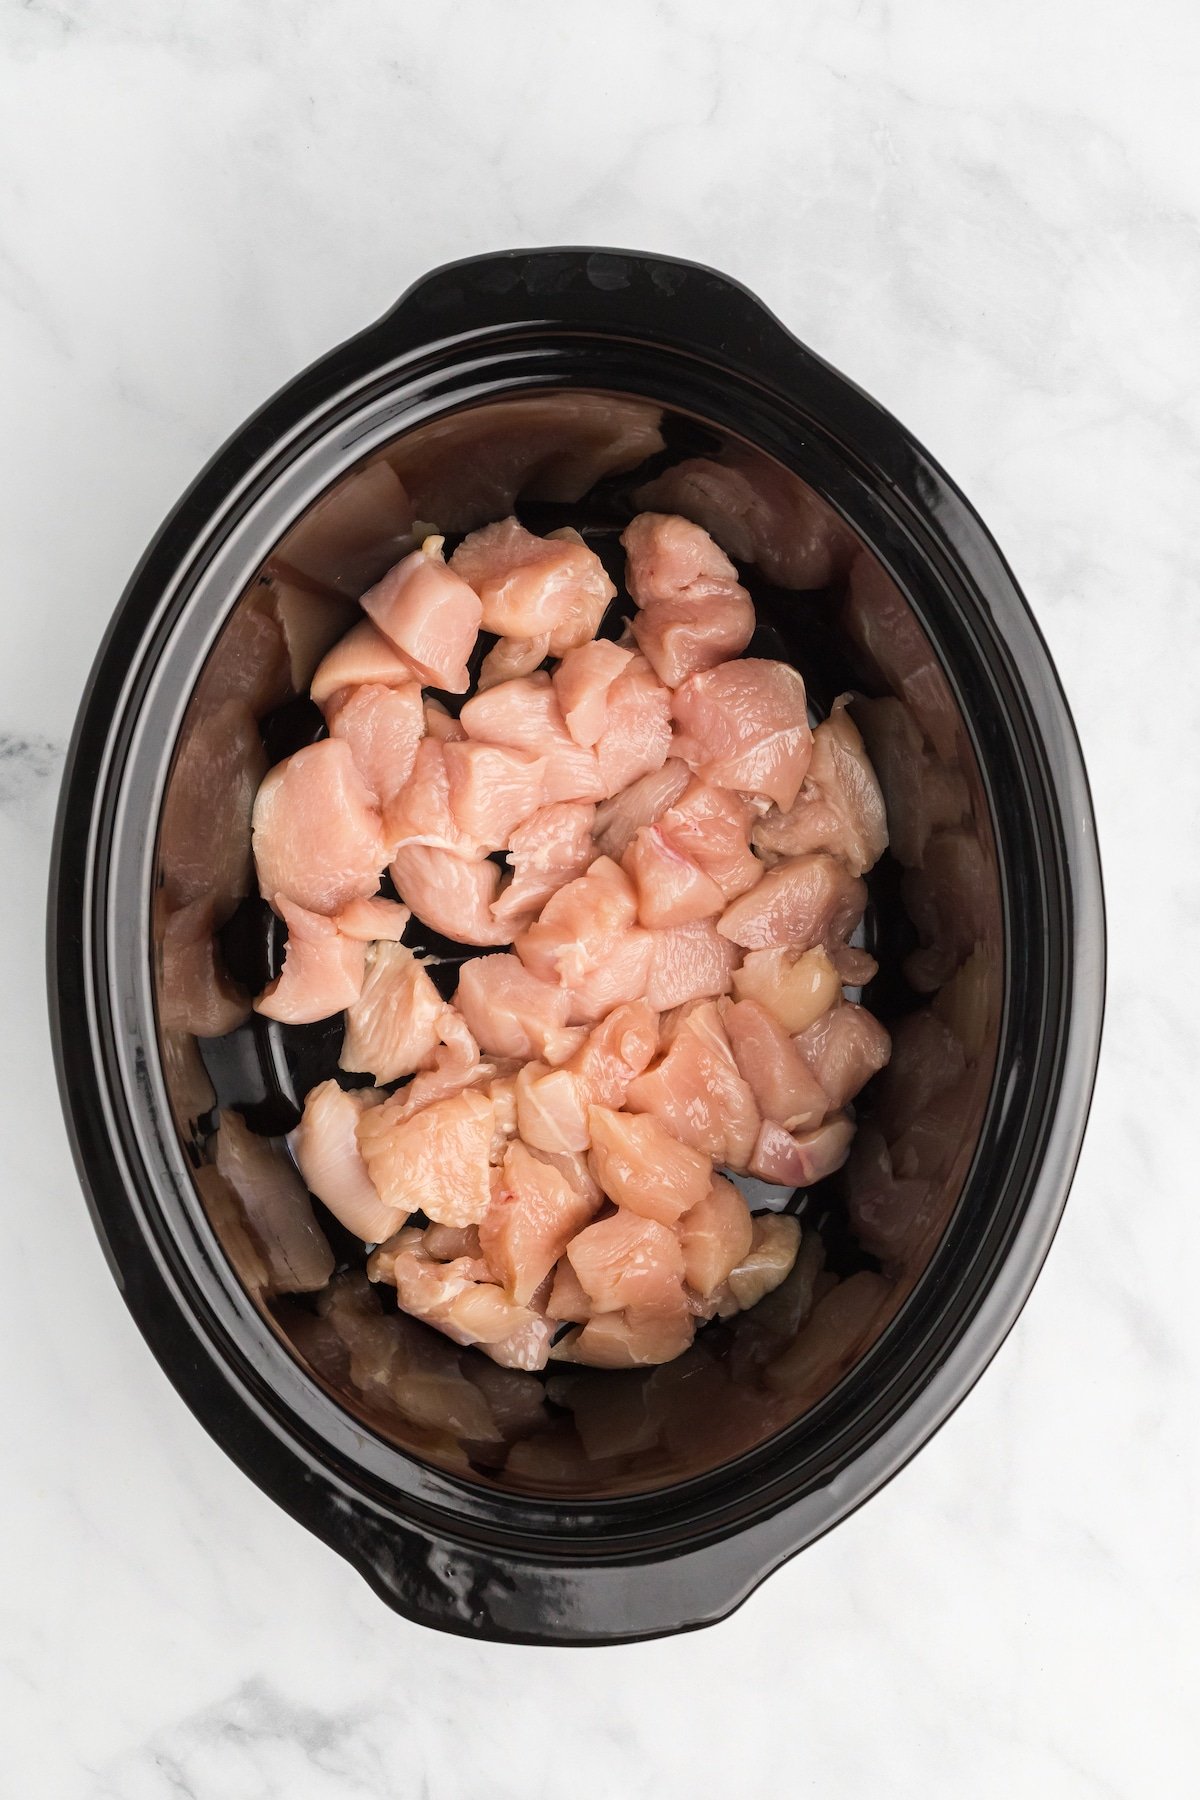 Chunks of chicken breast in the crockpot